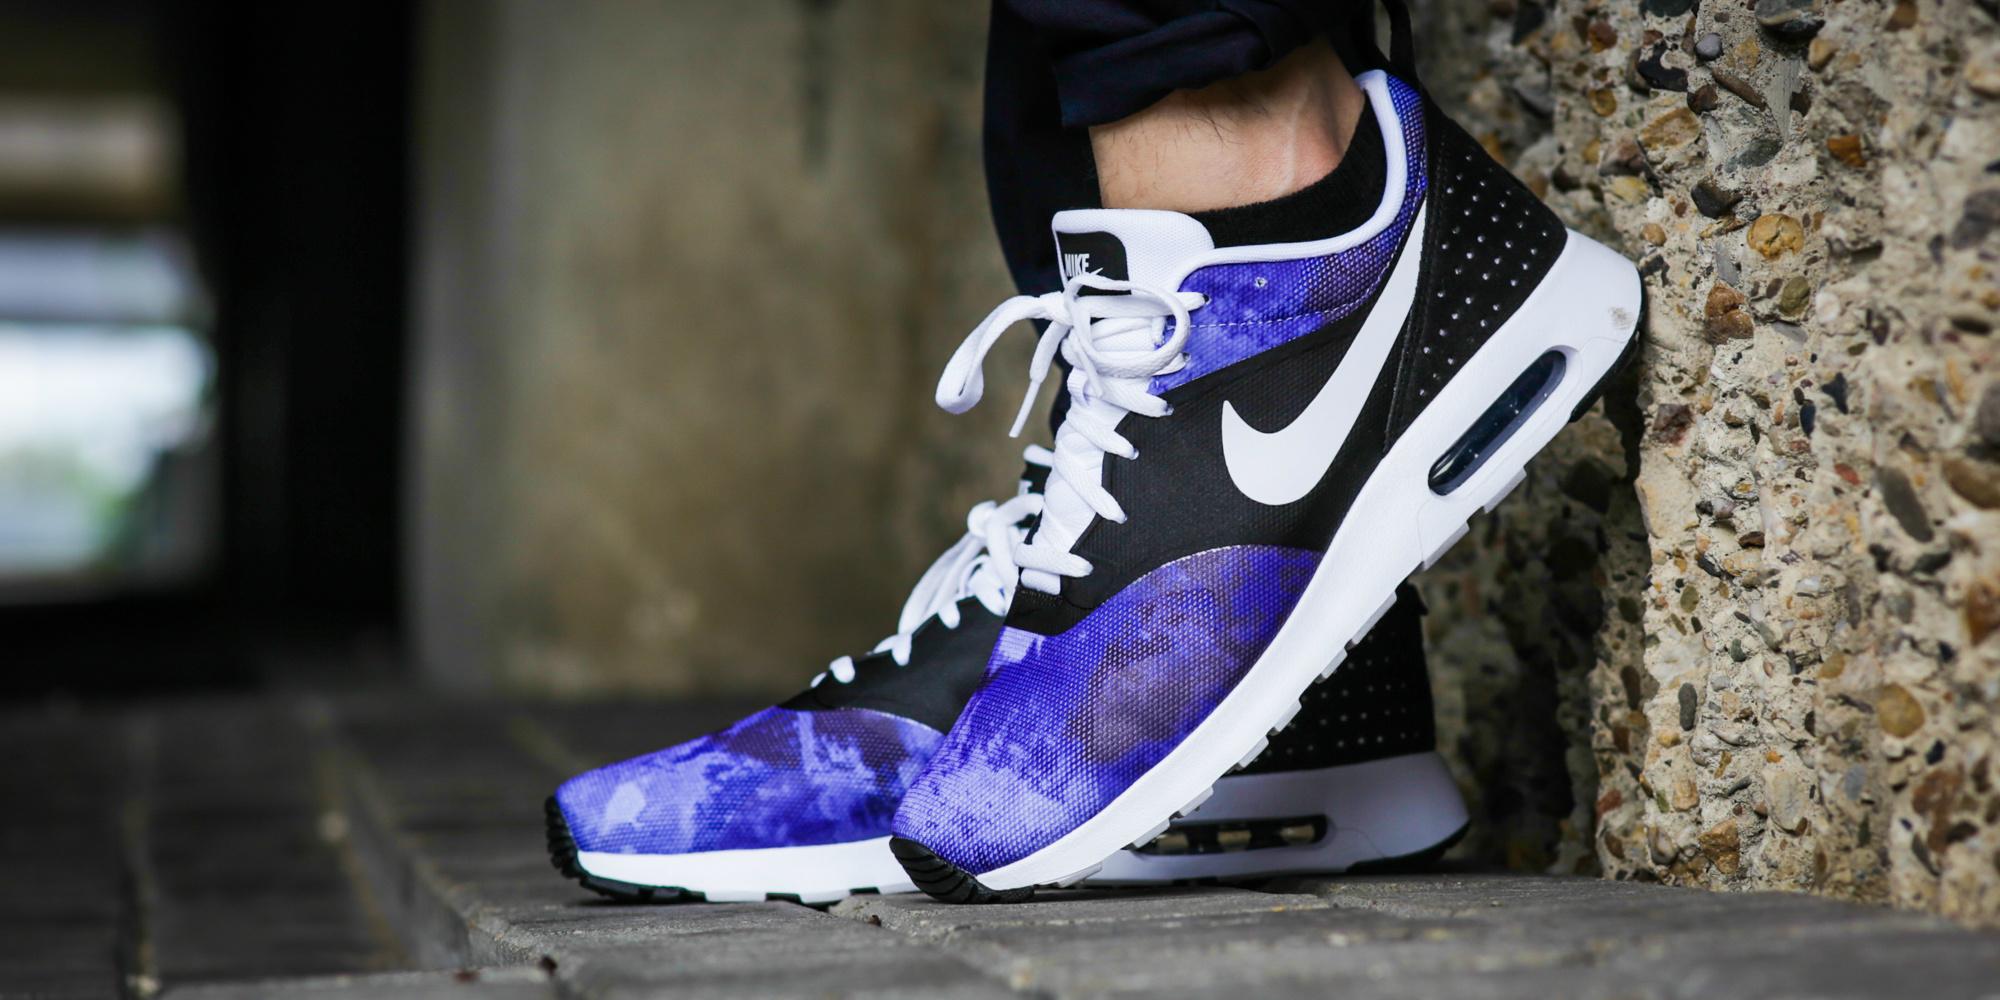 Foot EU på "Now available, exclusive Nike Air Max Tavas 'Tie Dye' http://t.co/pjscV4Klll" / Twitter